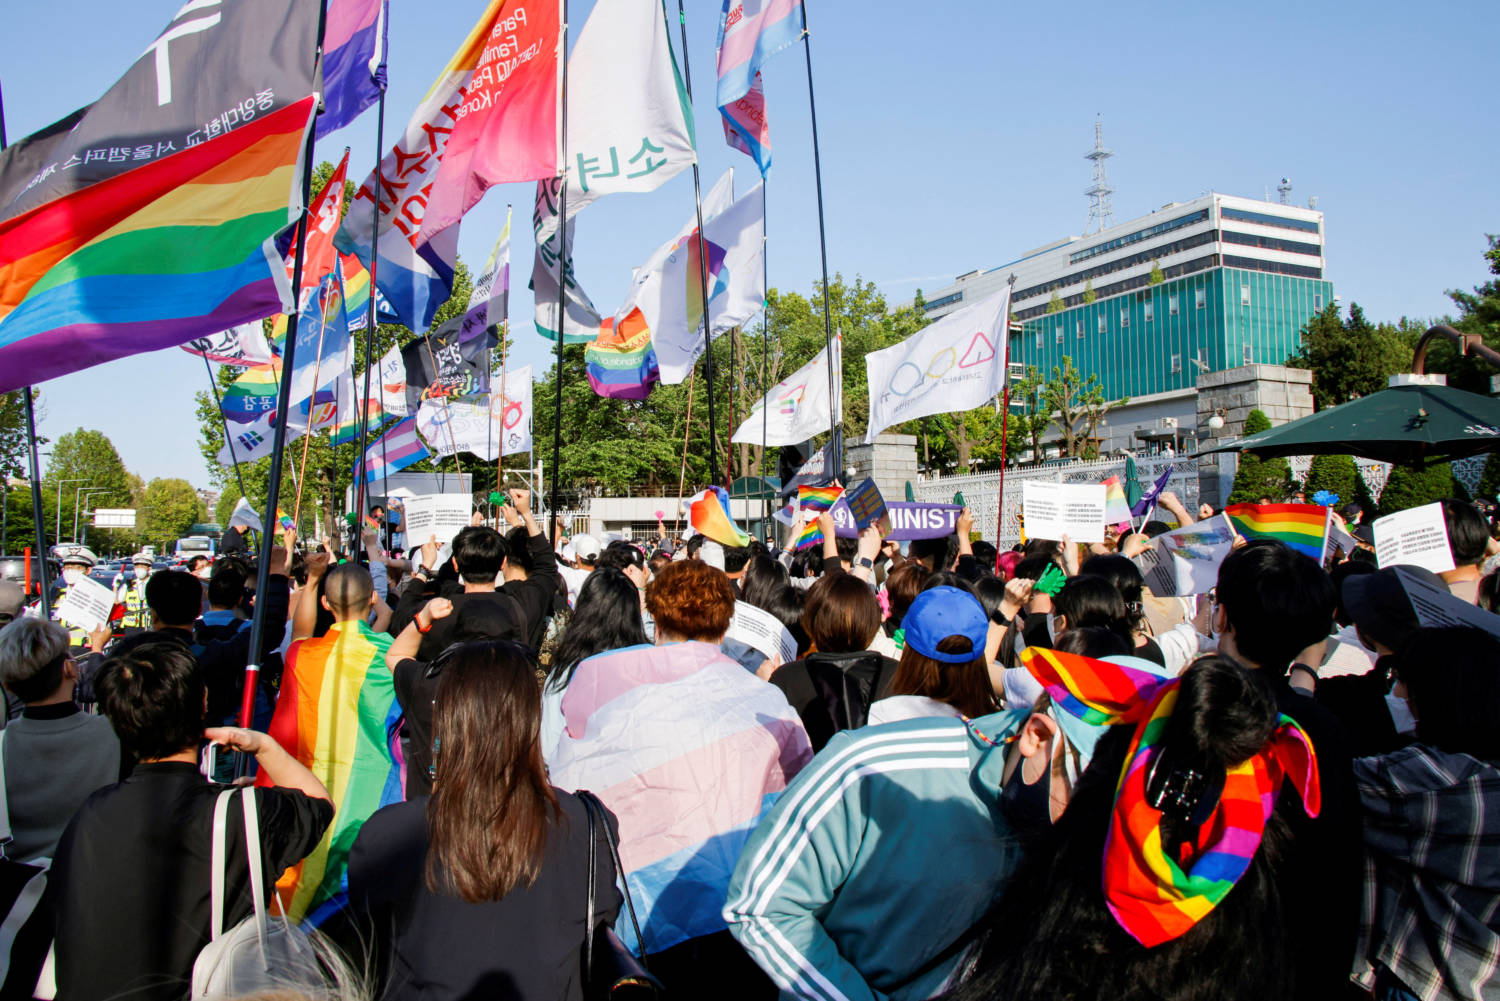 File Photo: Members Of The Lgbtq+ Community March In Front Of The New Presidential Office During A Protest Ahead Of The International Day Against Homophobia, Transphobia And Biphobia, In Seoul